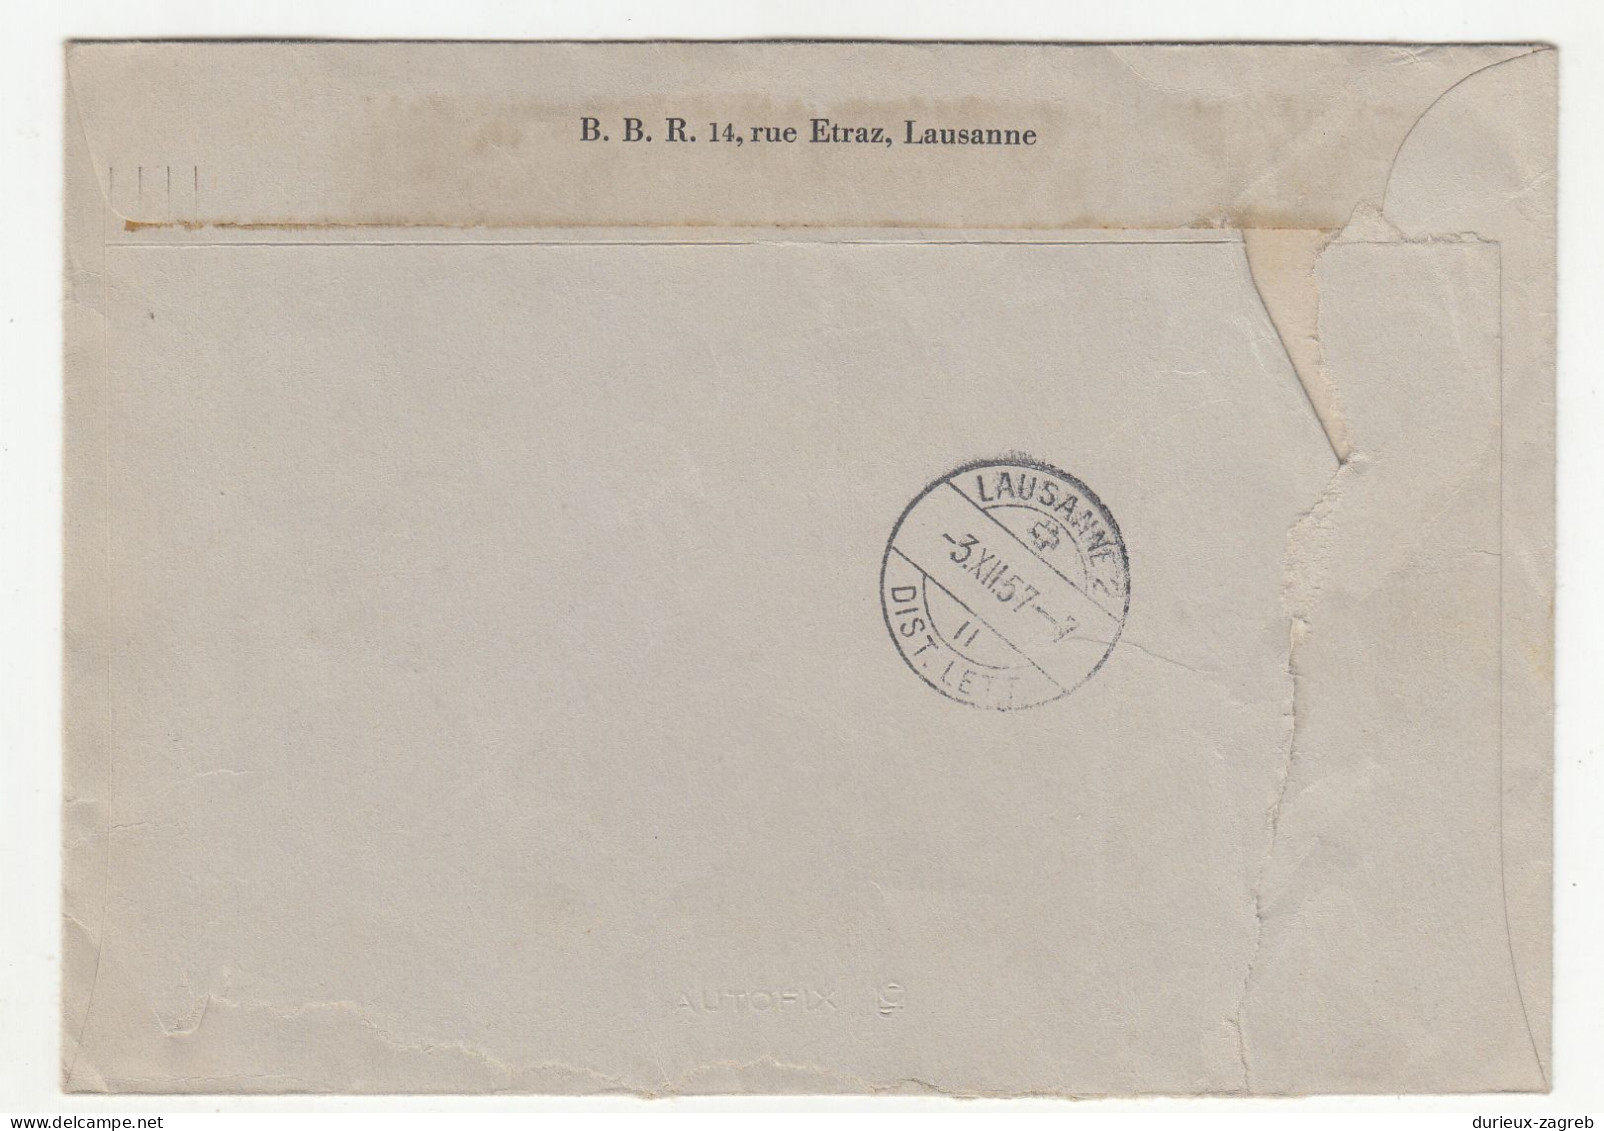 Switzerland Letter Meter Stamp Cover Posted 1957 - Taxed Postage Due Switzerland Ordinary Stamp B240510 - Segnatasse